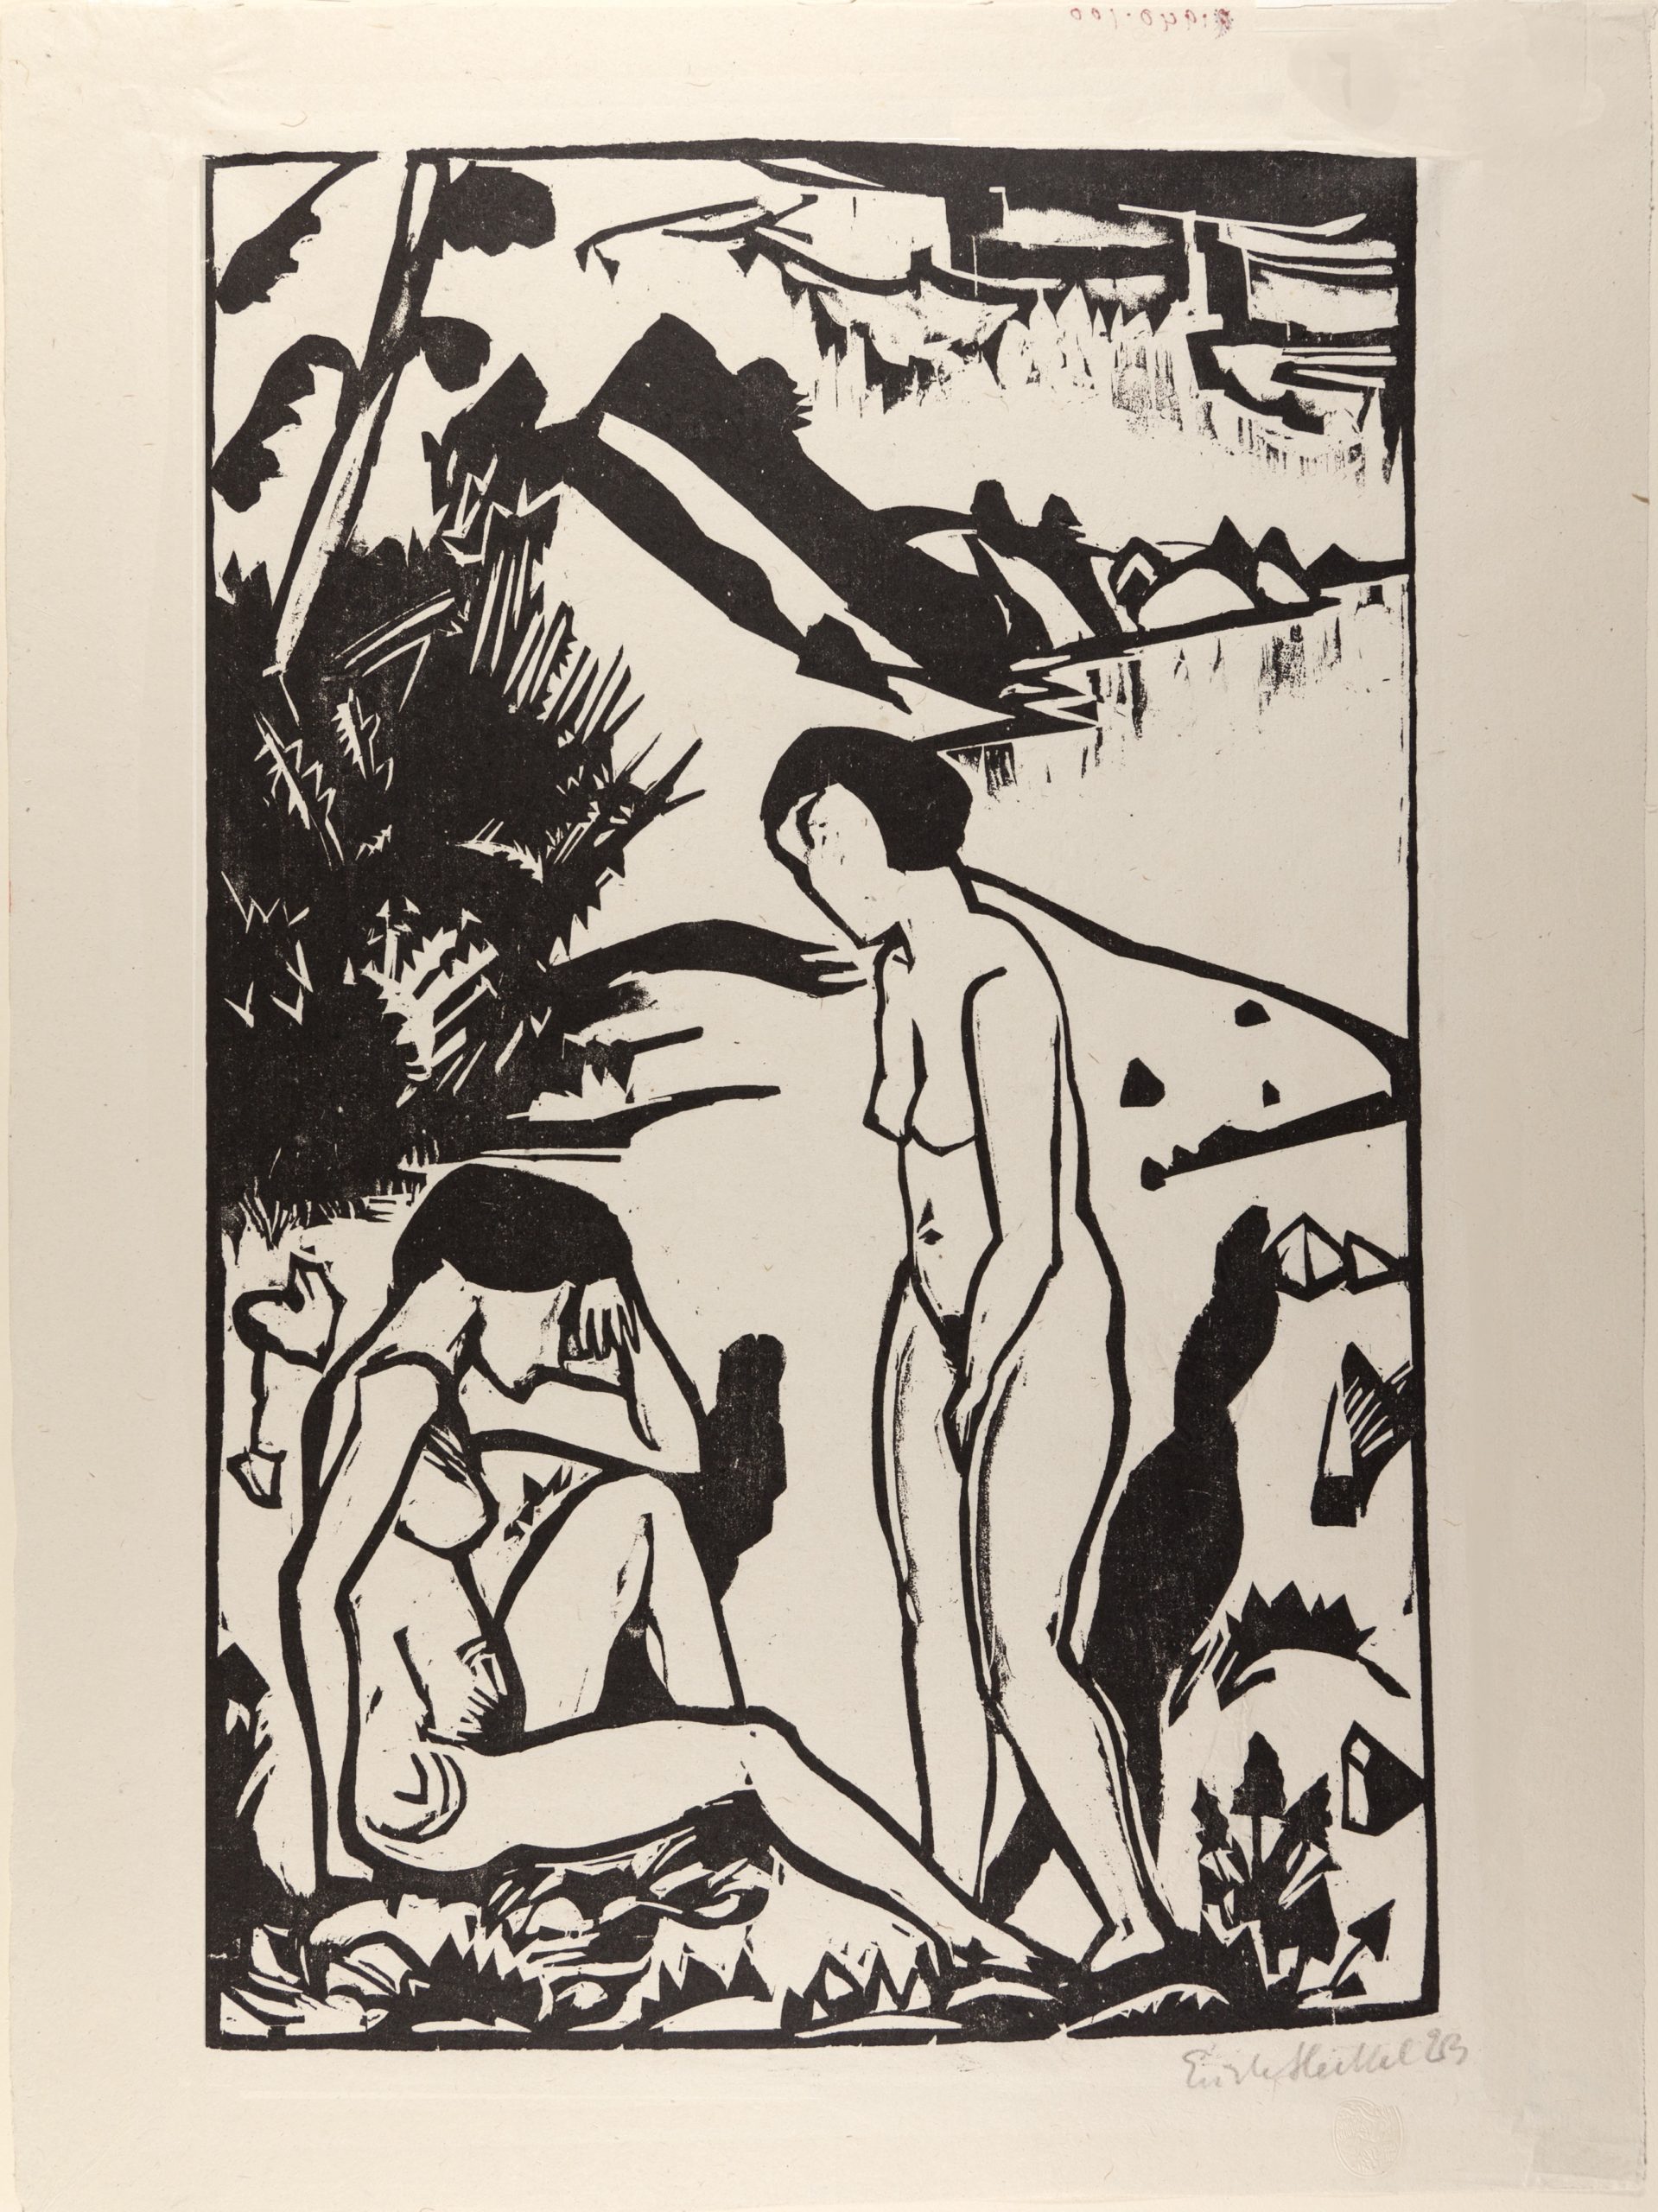 Erich Heckel, The Bathers, woodcut, 1923, 18 ½ x 13 7/8 inches, (Mills College Art Museum)